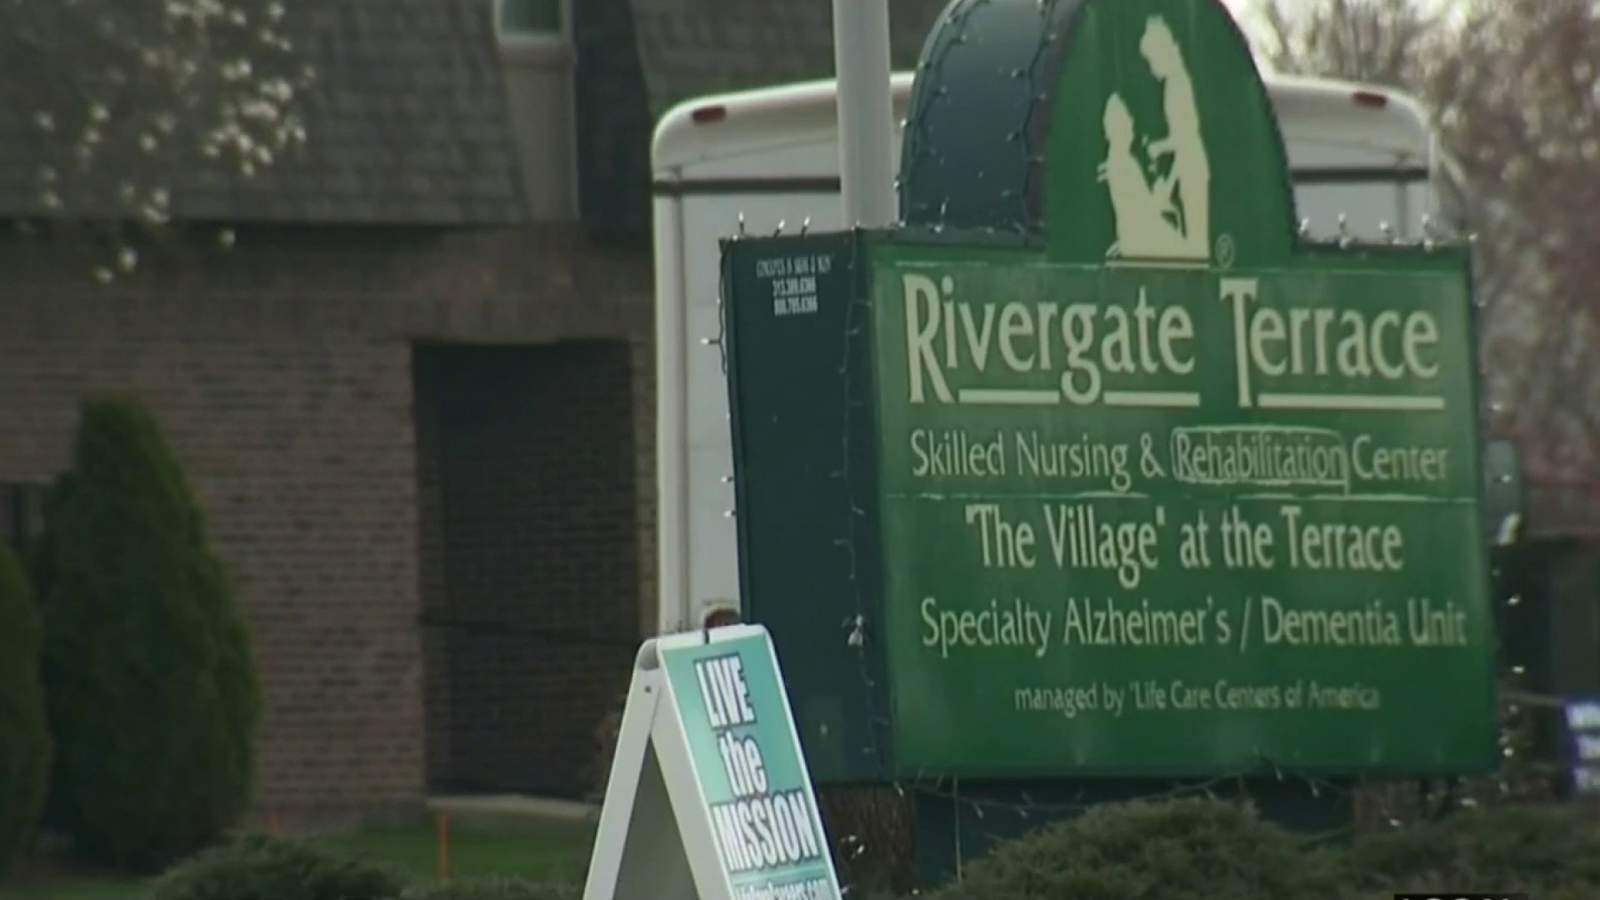 73-year-old woman dies from amid state investigation of COVID-19 at Riverview nursing home